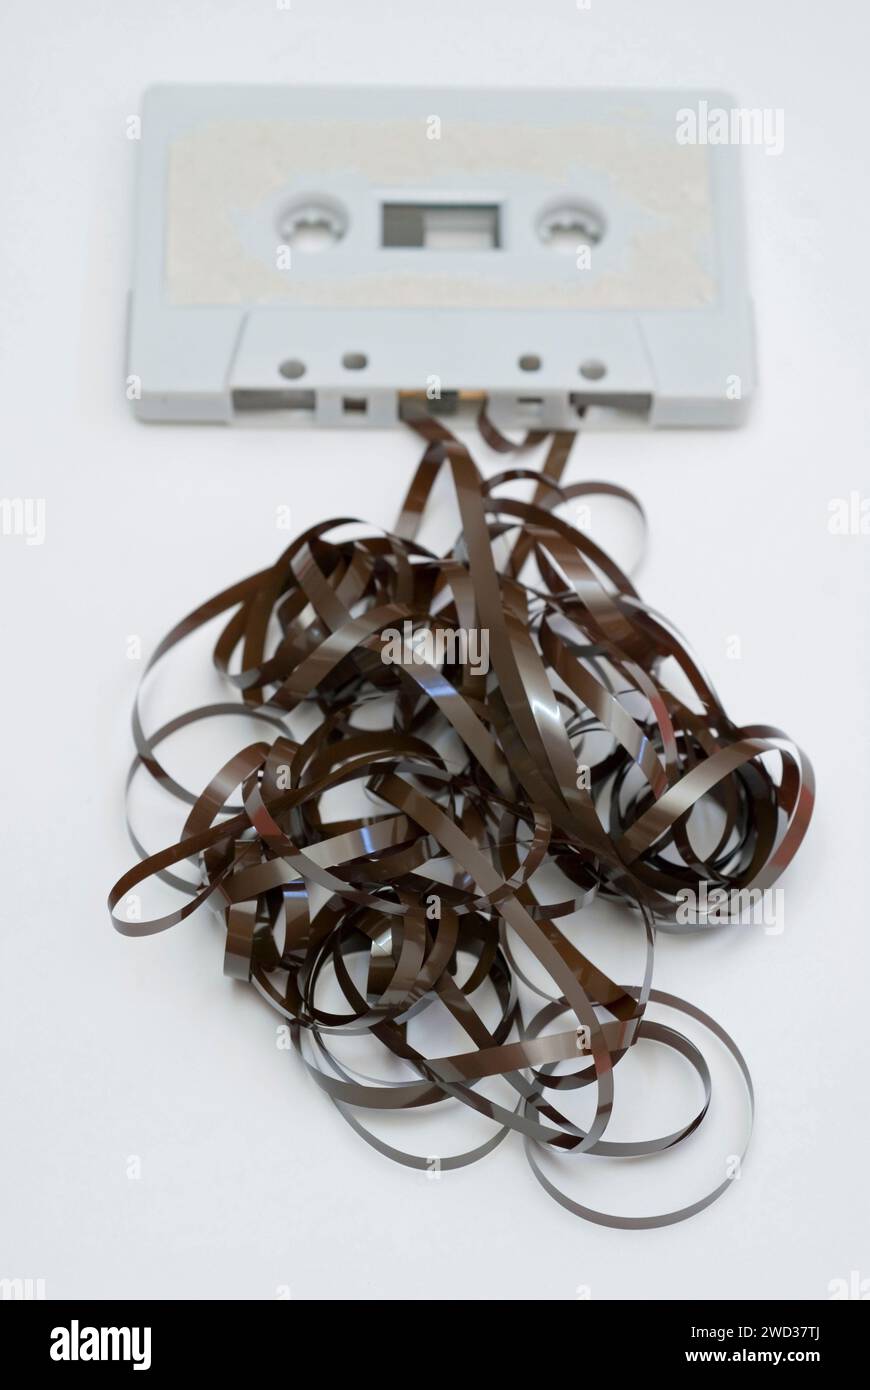 tangled tape outside an old audio cassette Stock Photo